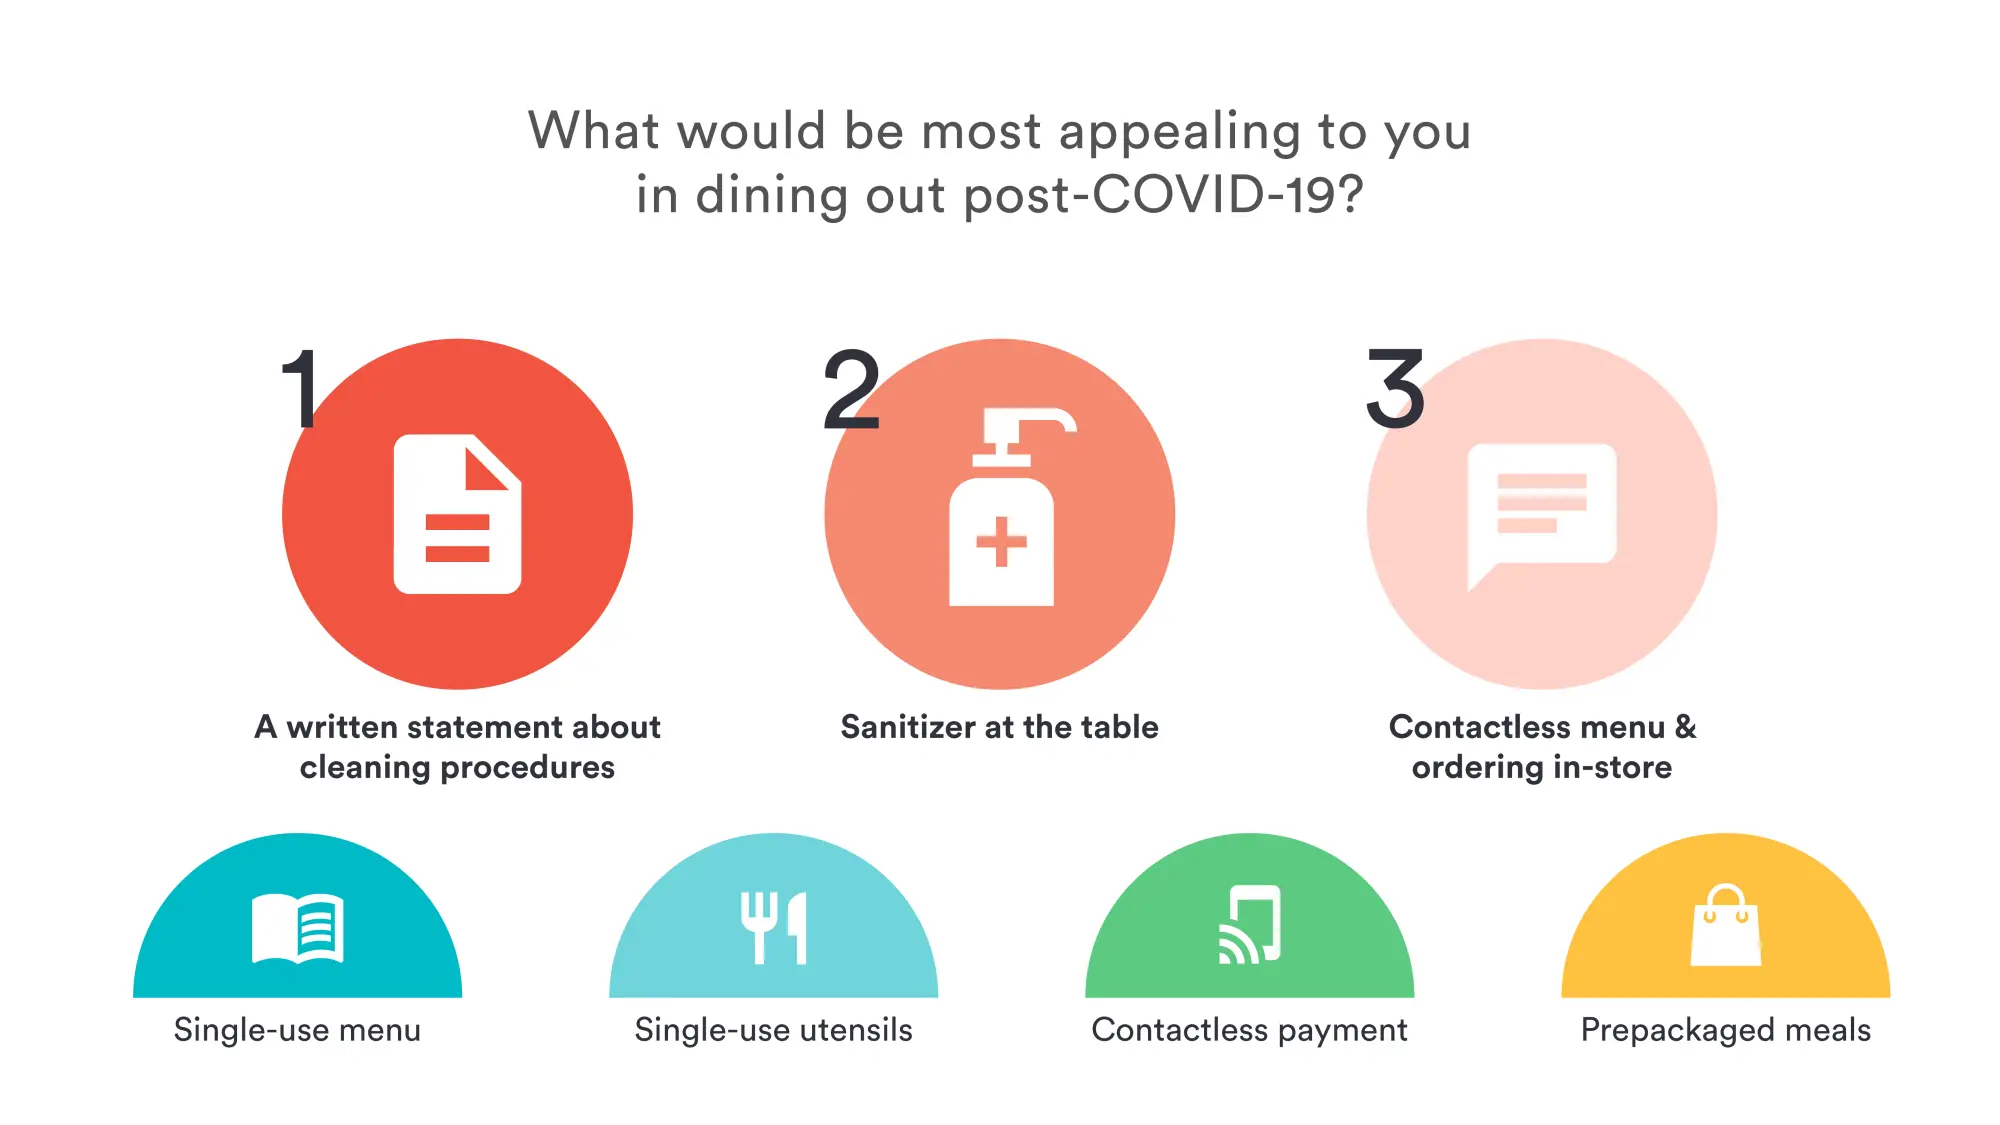 Restaurant Reopening Data: What procedures diners would find most appealing for restaurants to implement post-COVID-19